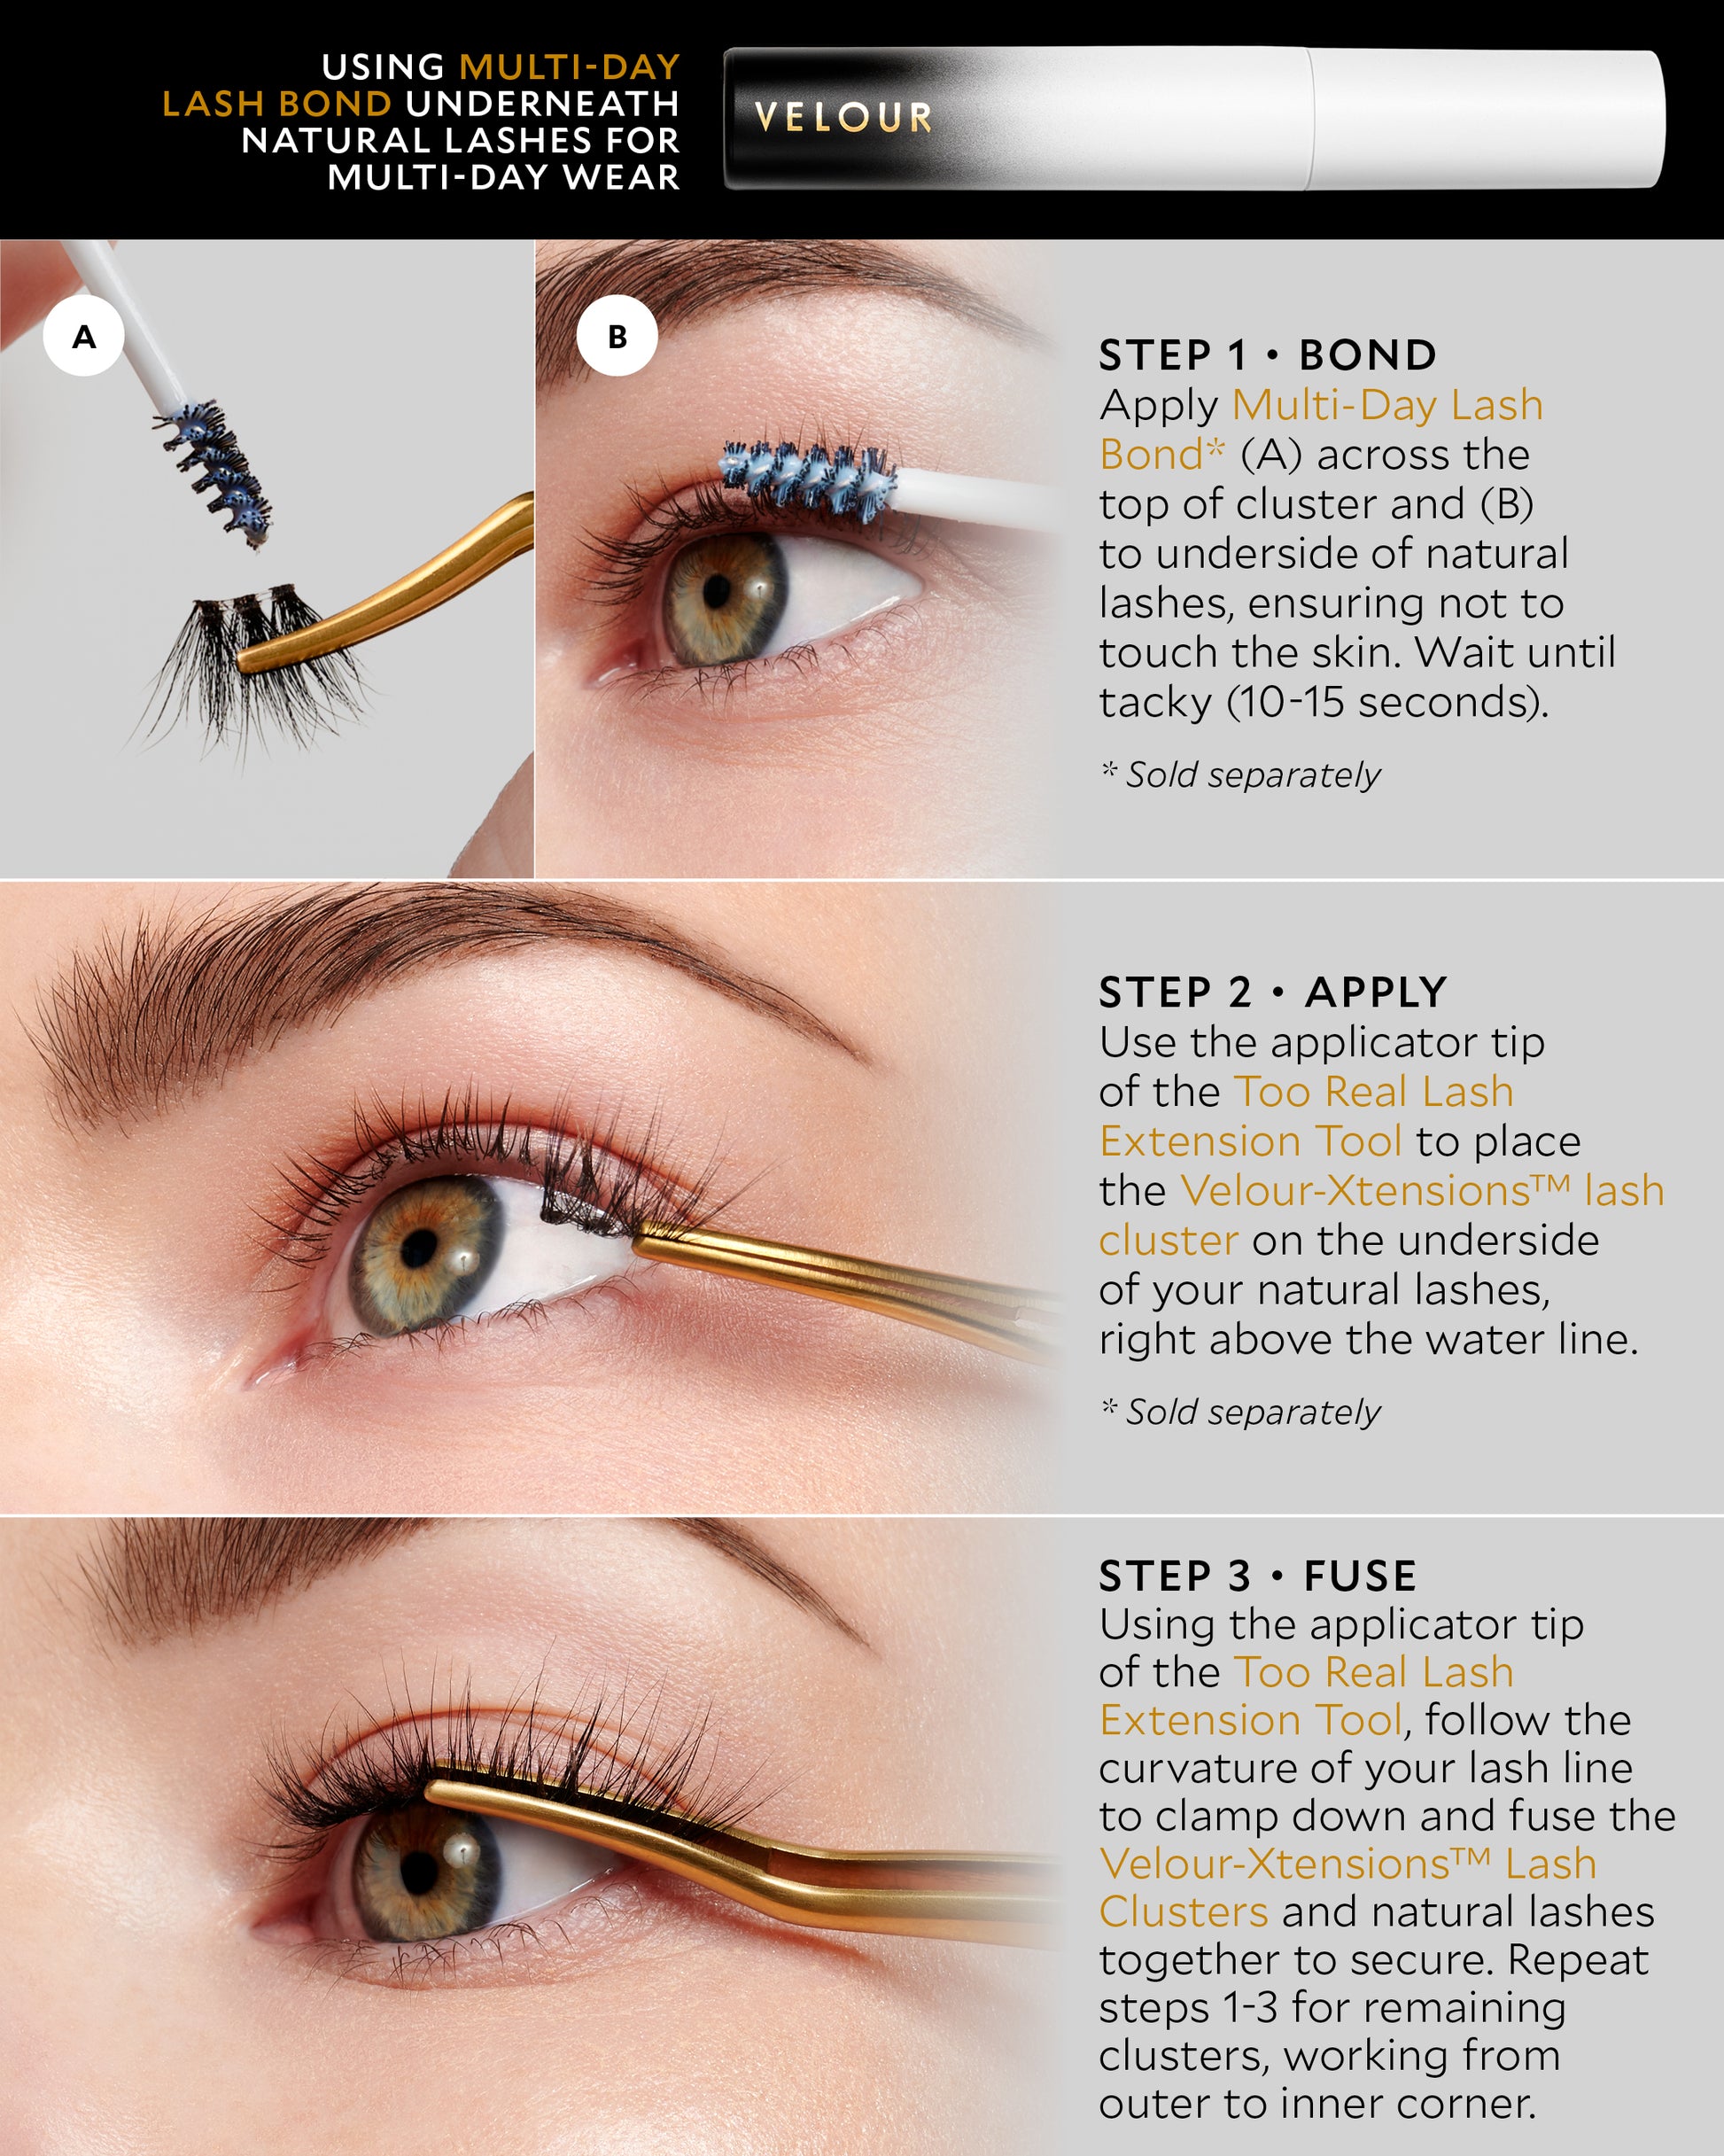 Velour Extensions Lash Bond How To Apply